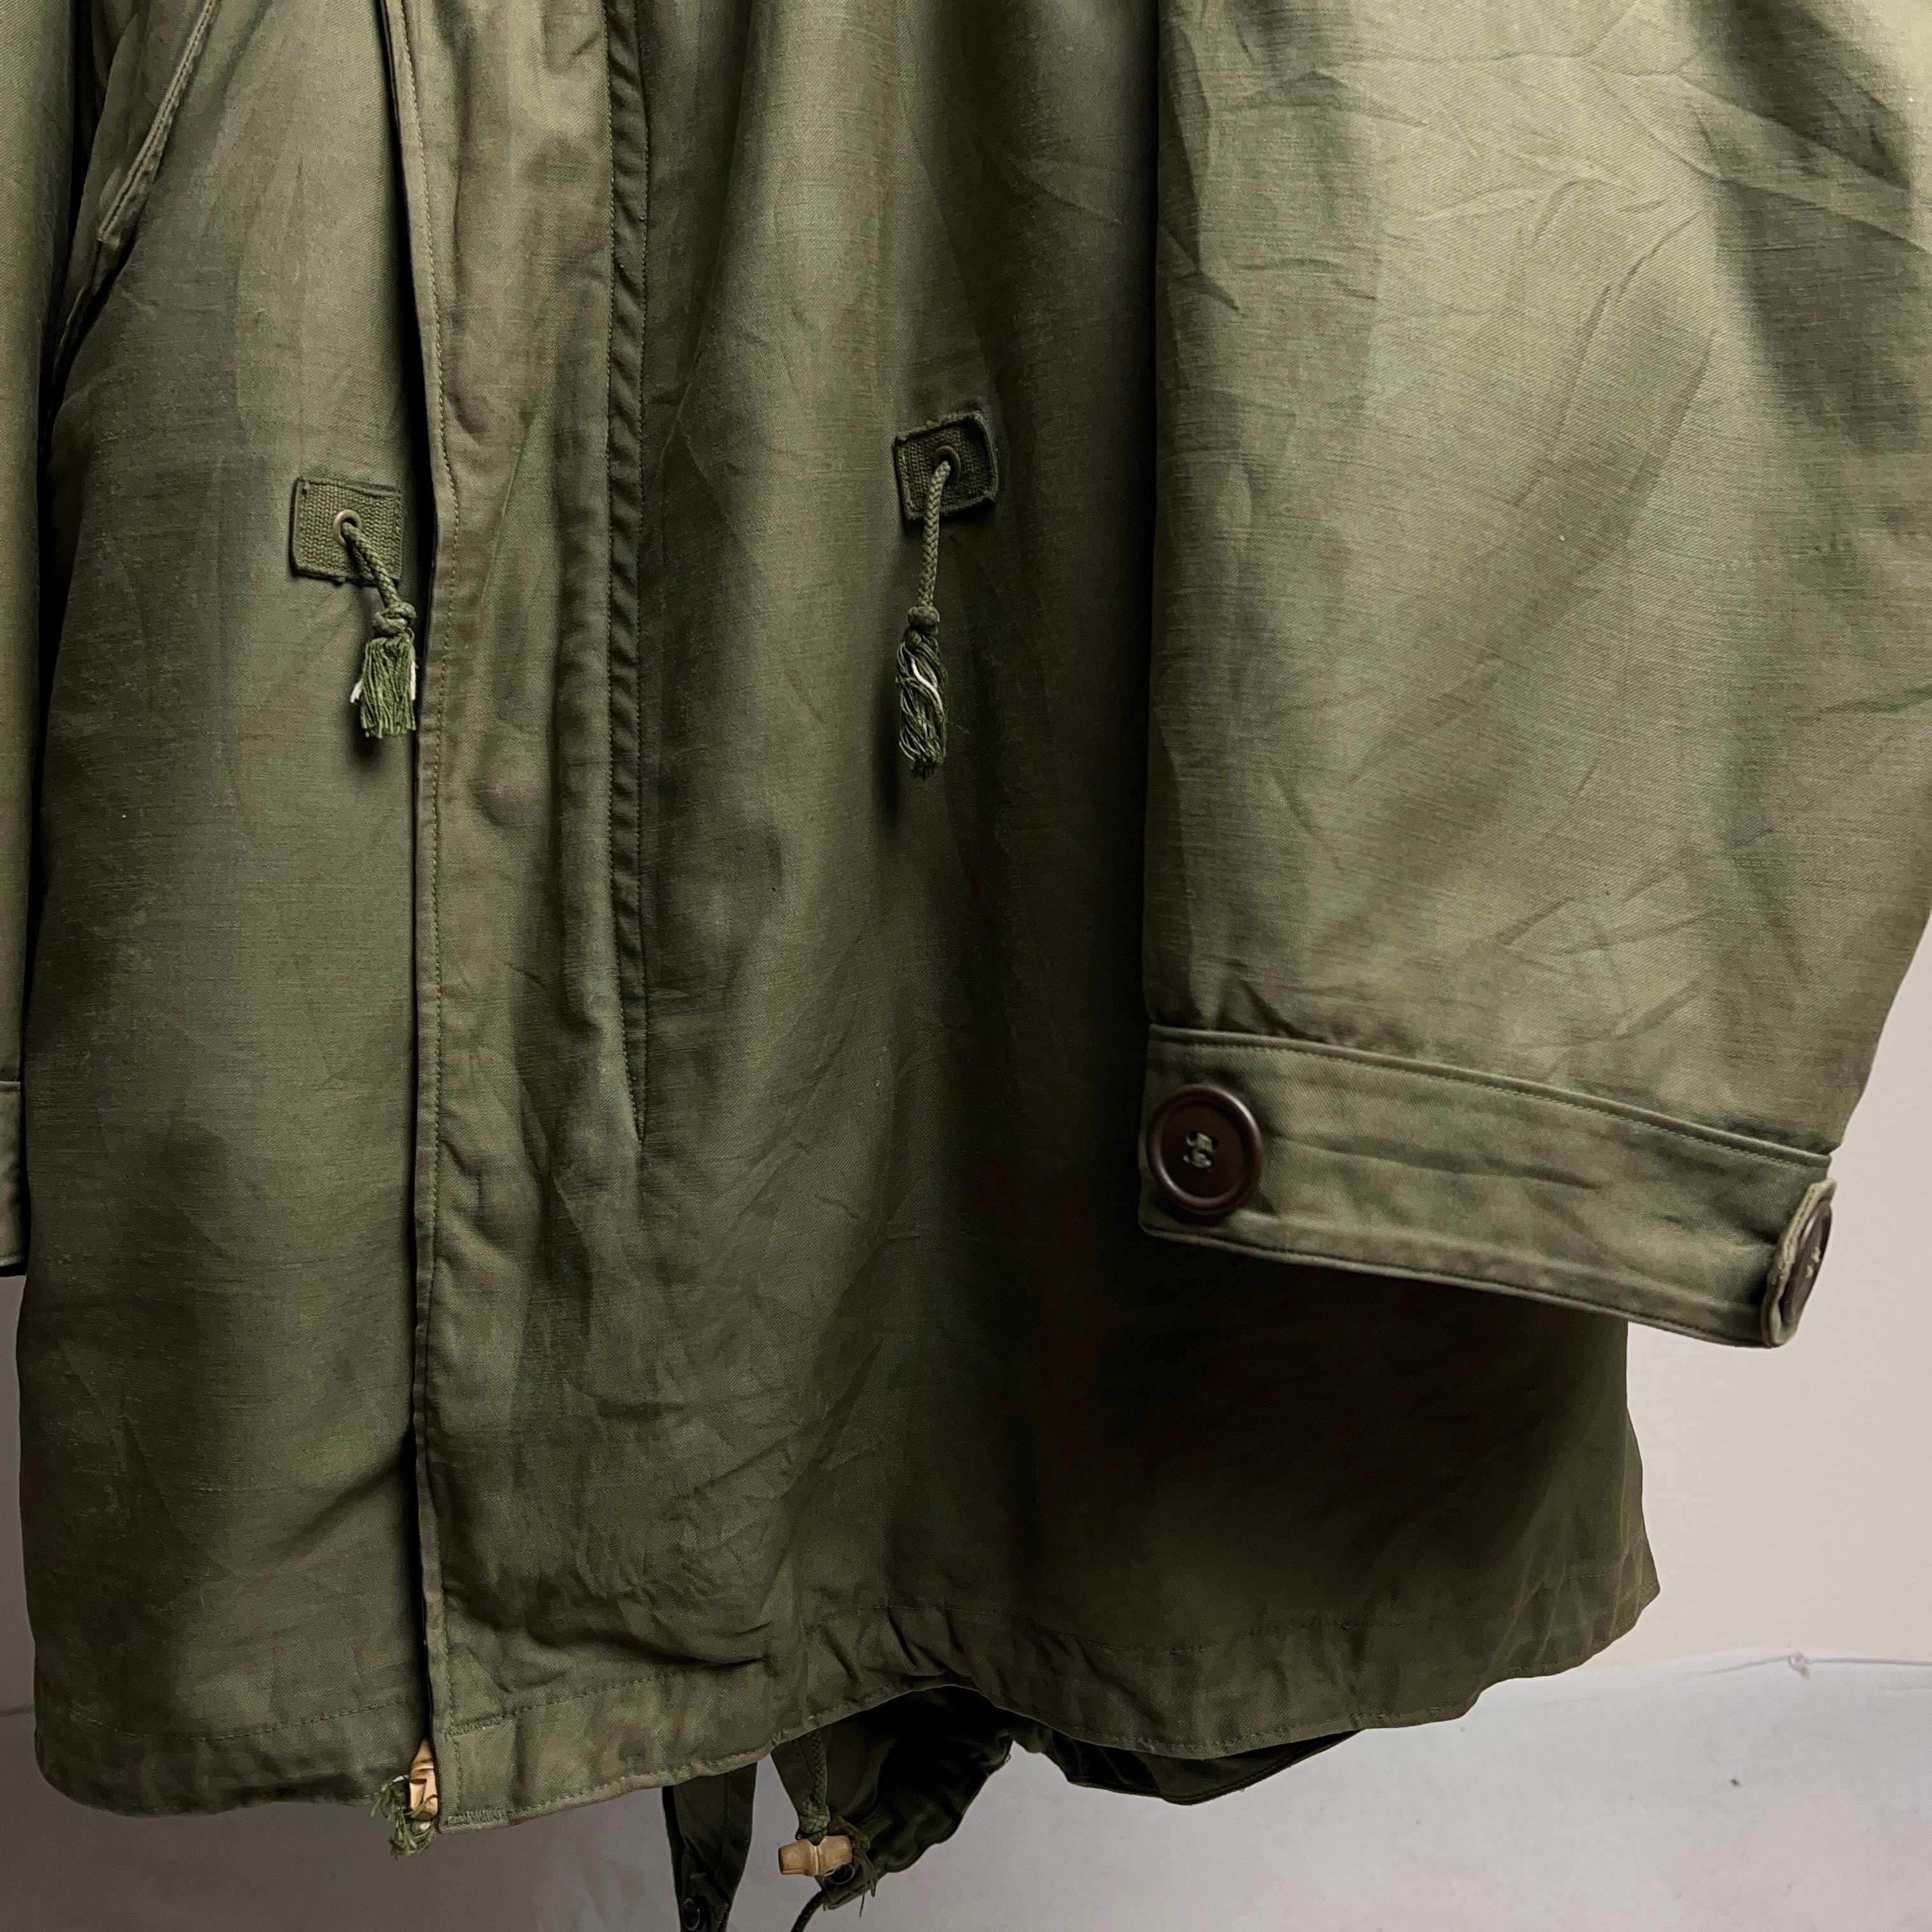 Special 希少 1940's U.S.ARMY M-48 Field Parka SIZE M 1948年 アメリカ軍 フィールドパーカー  モッズコート フィッシュテール ライナー付【1000A75】【送料無料】